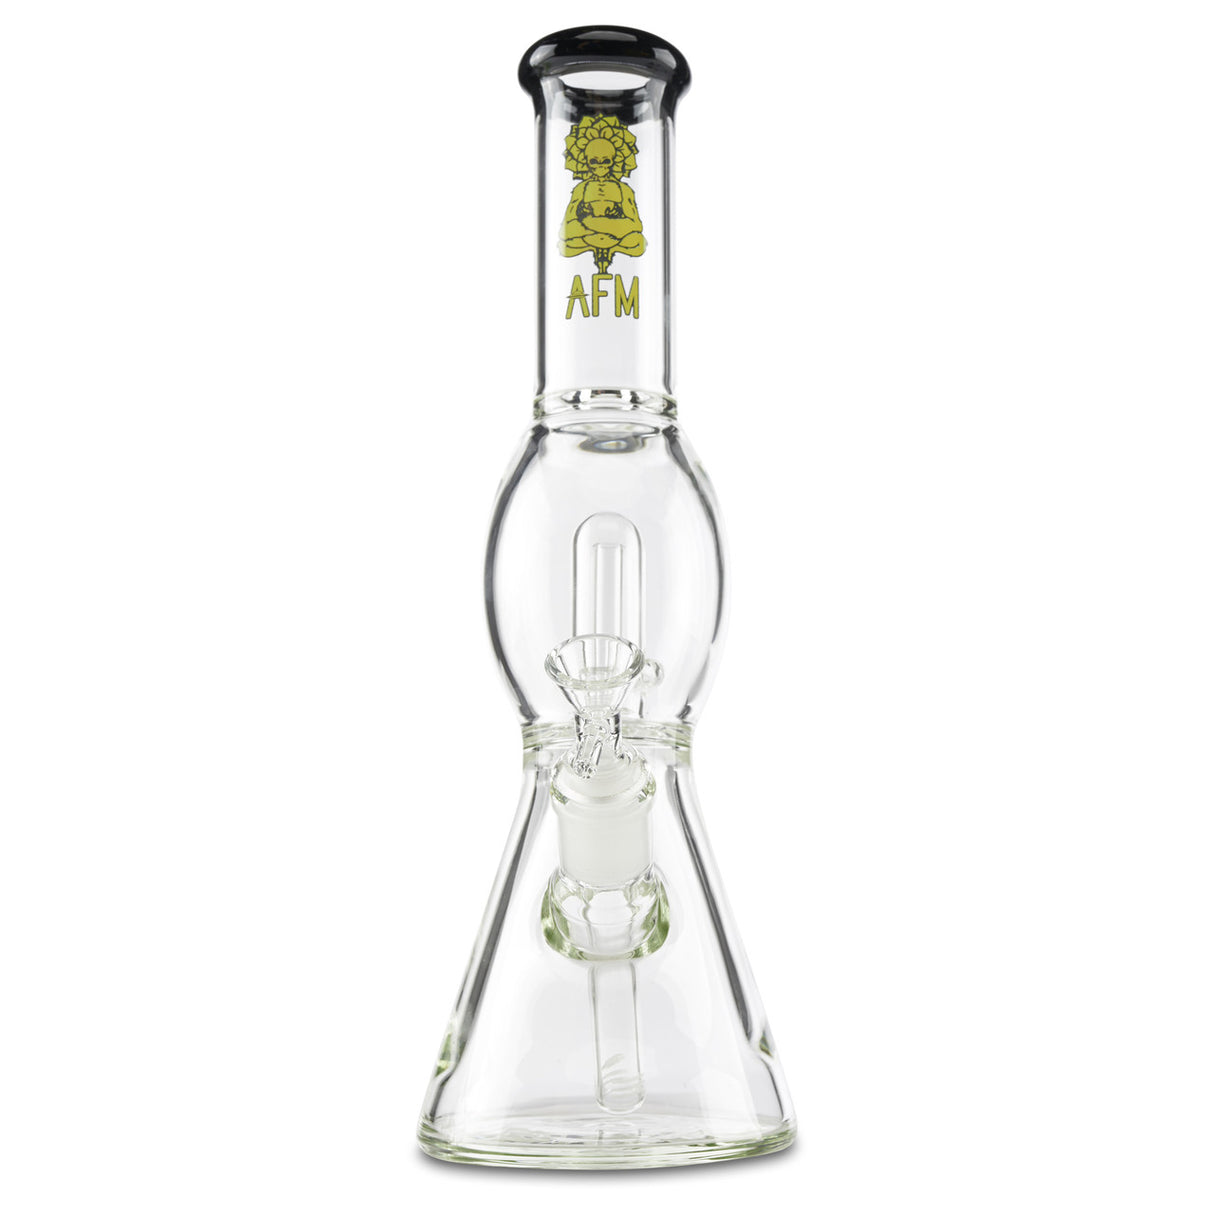 afm short yellow and black bong water pipe 12 inch with bowl and downstem